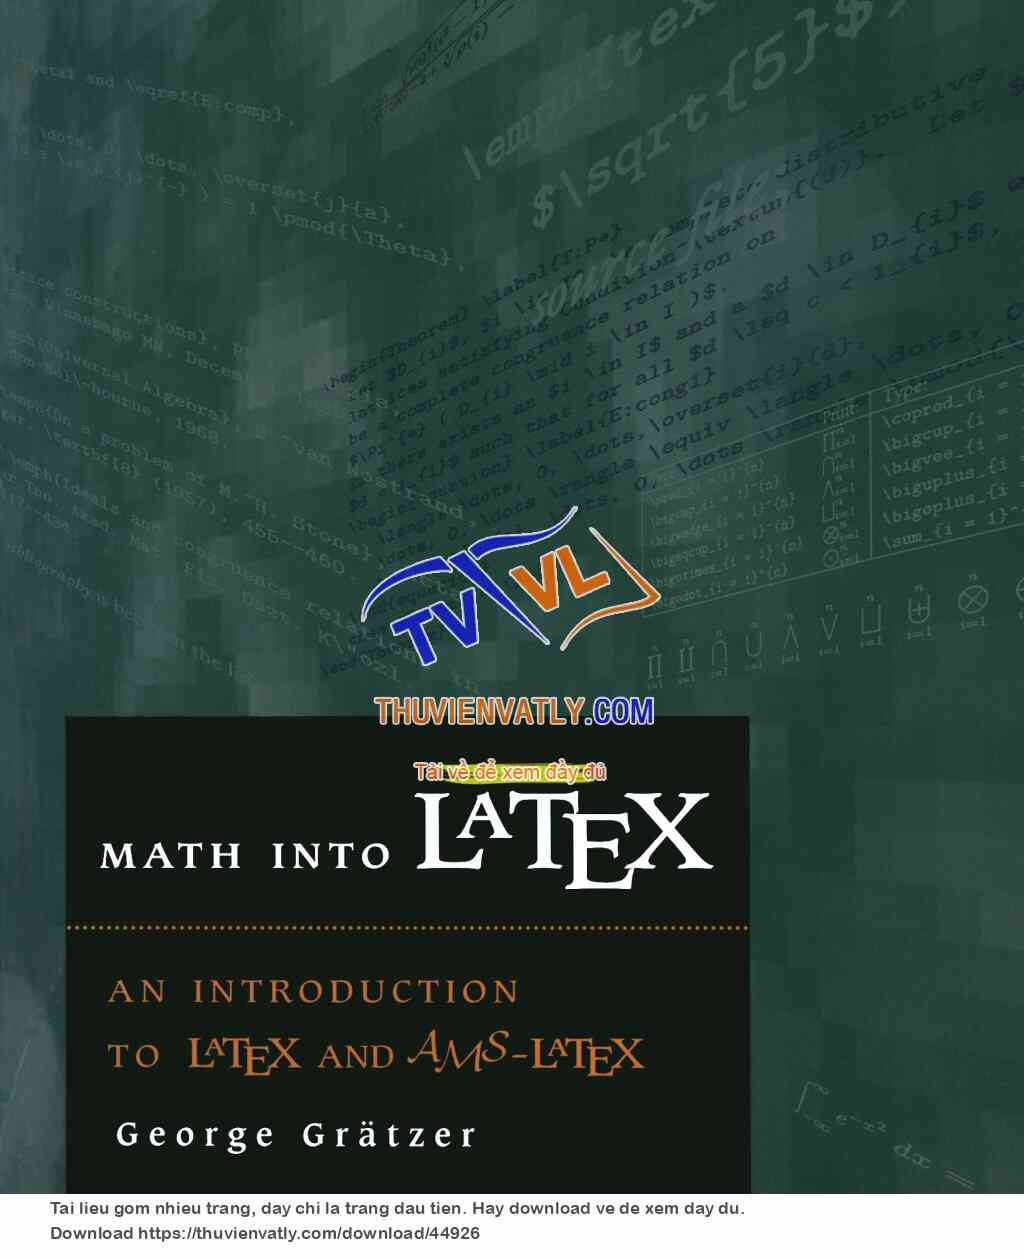 An Introduction to LATEX and AMS-LATEX